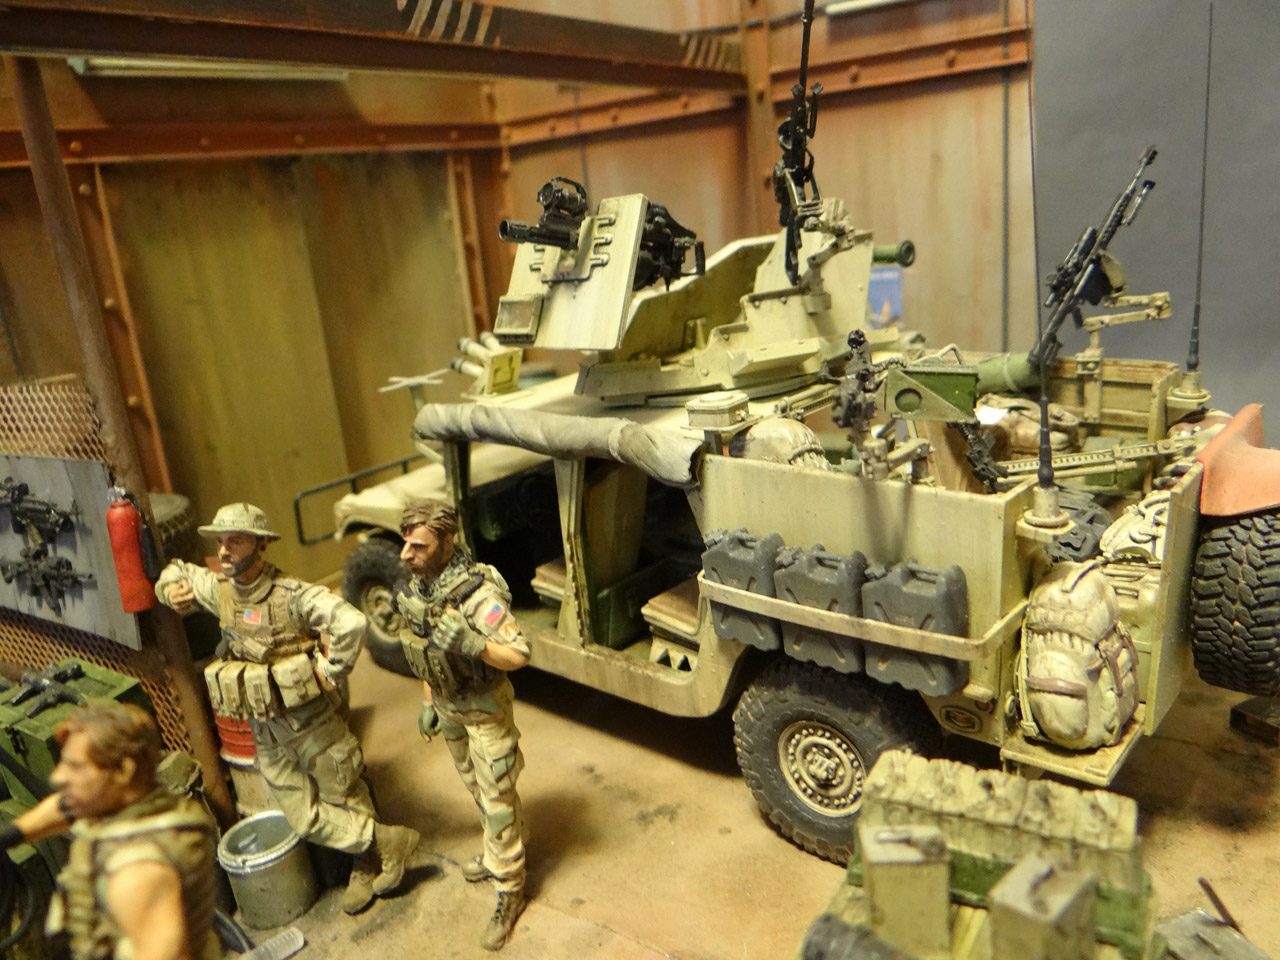 Dioramas and Vignettes: Enforcement to democracy, photo #15